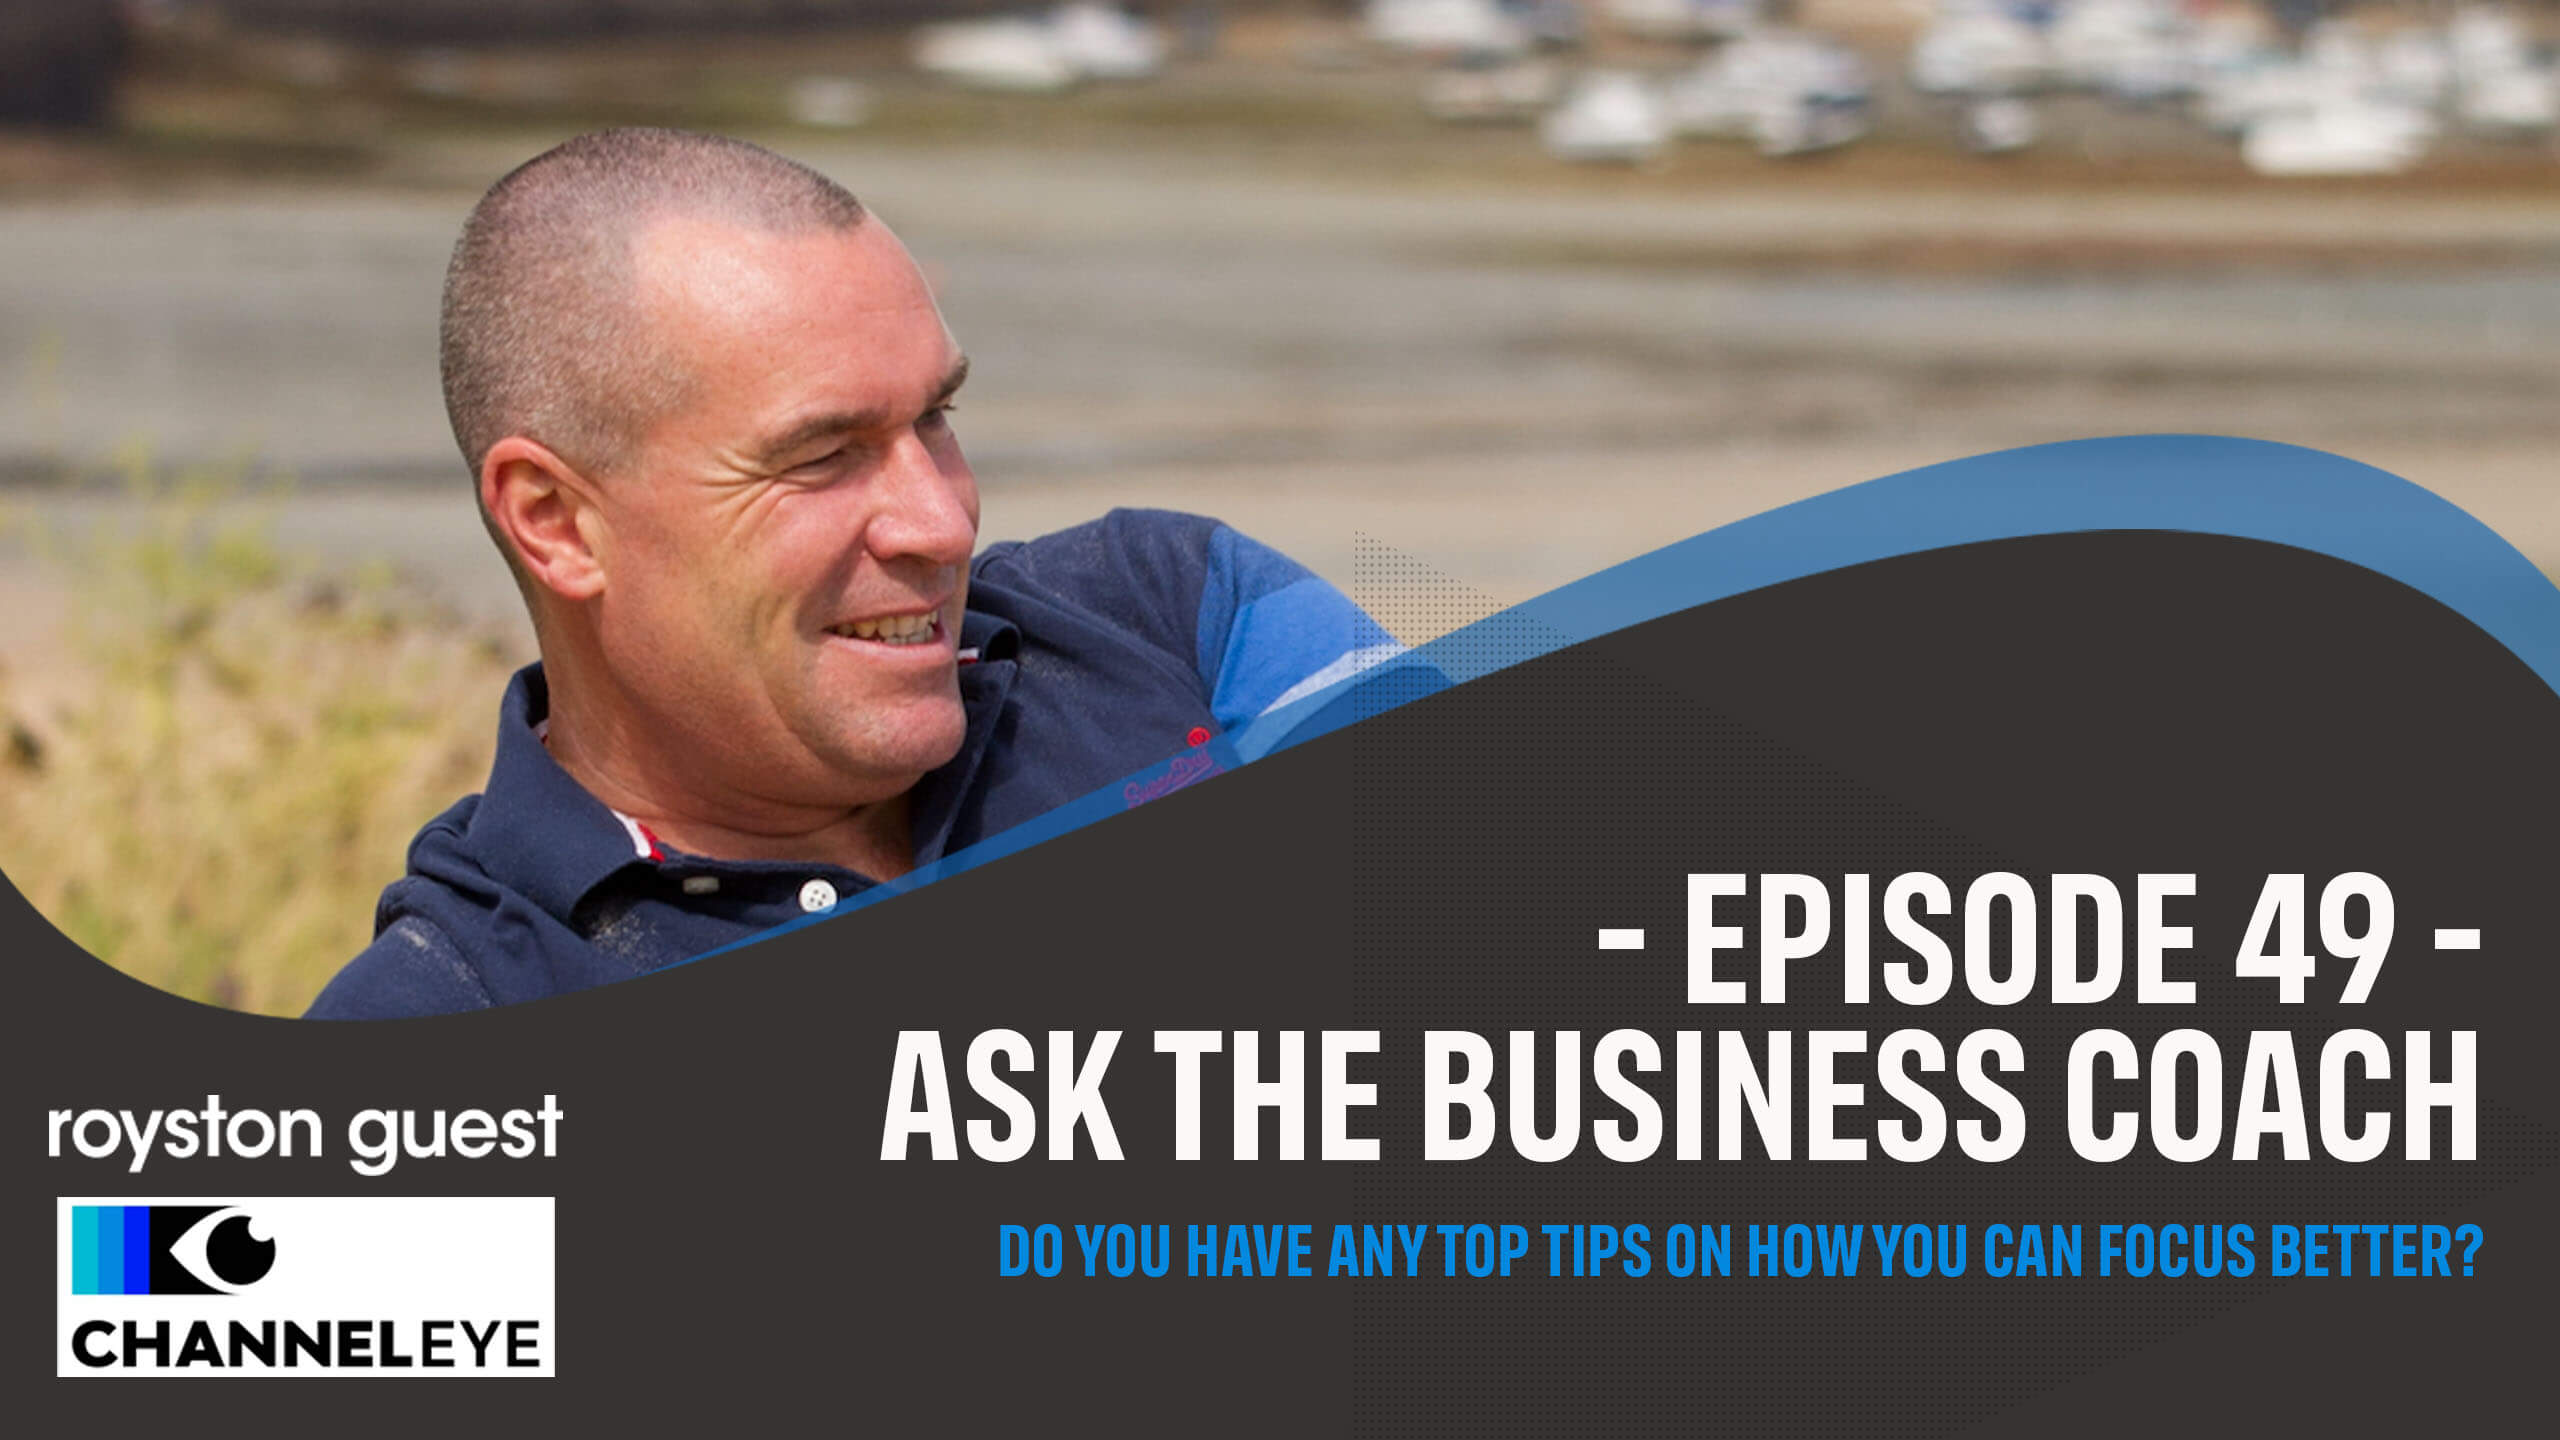 Ask the business coach episode 49